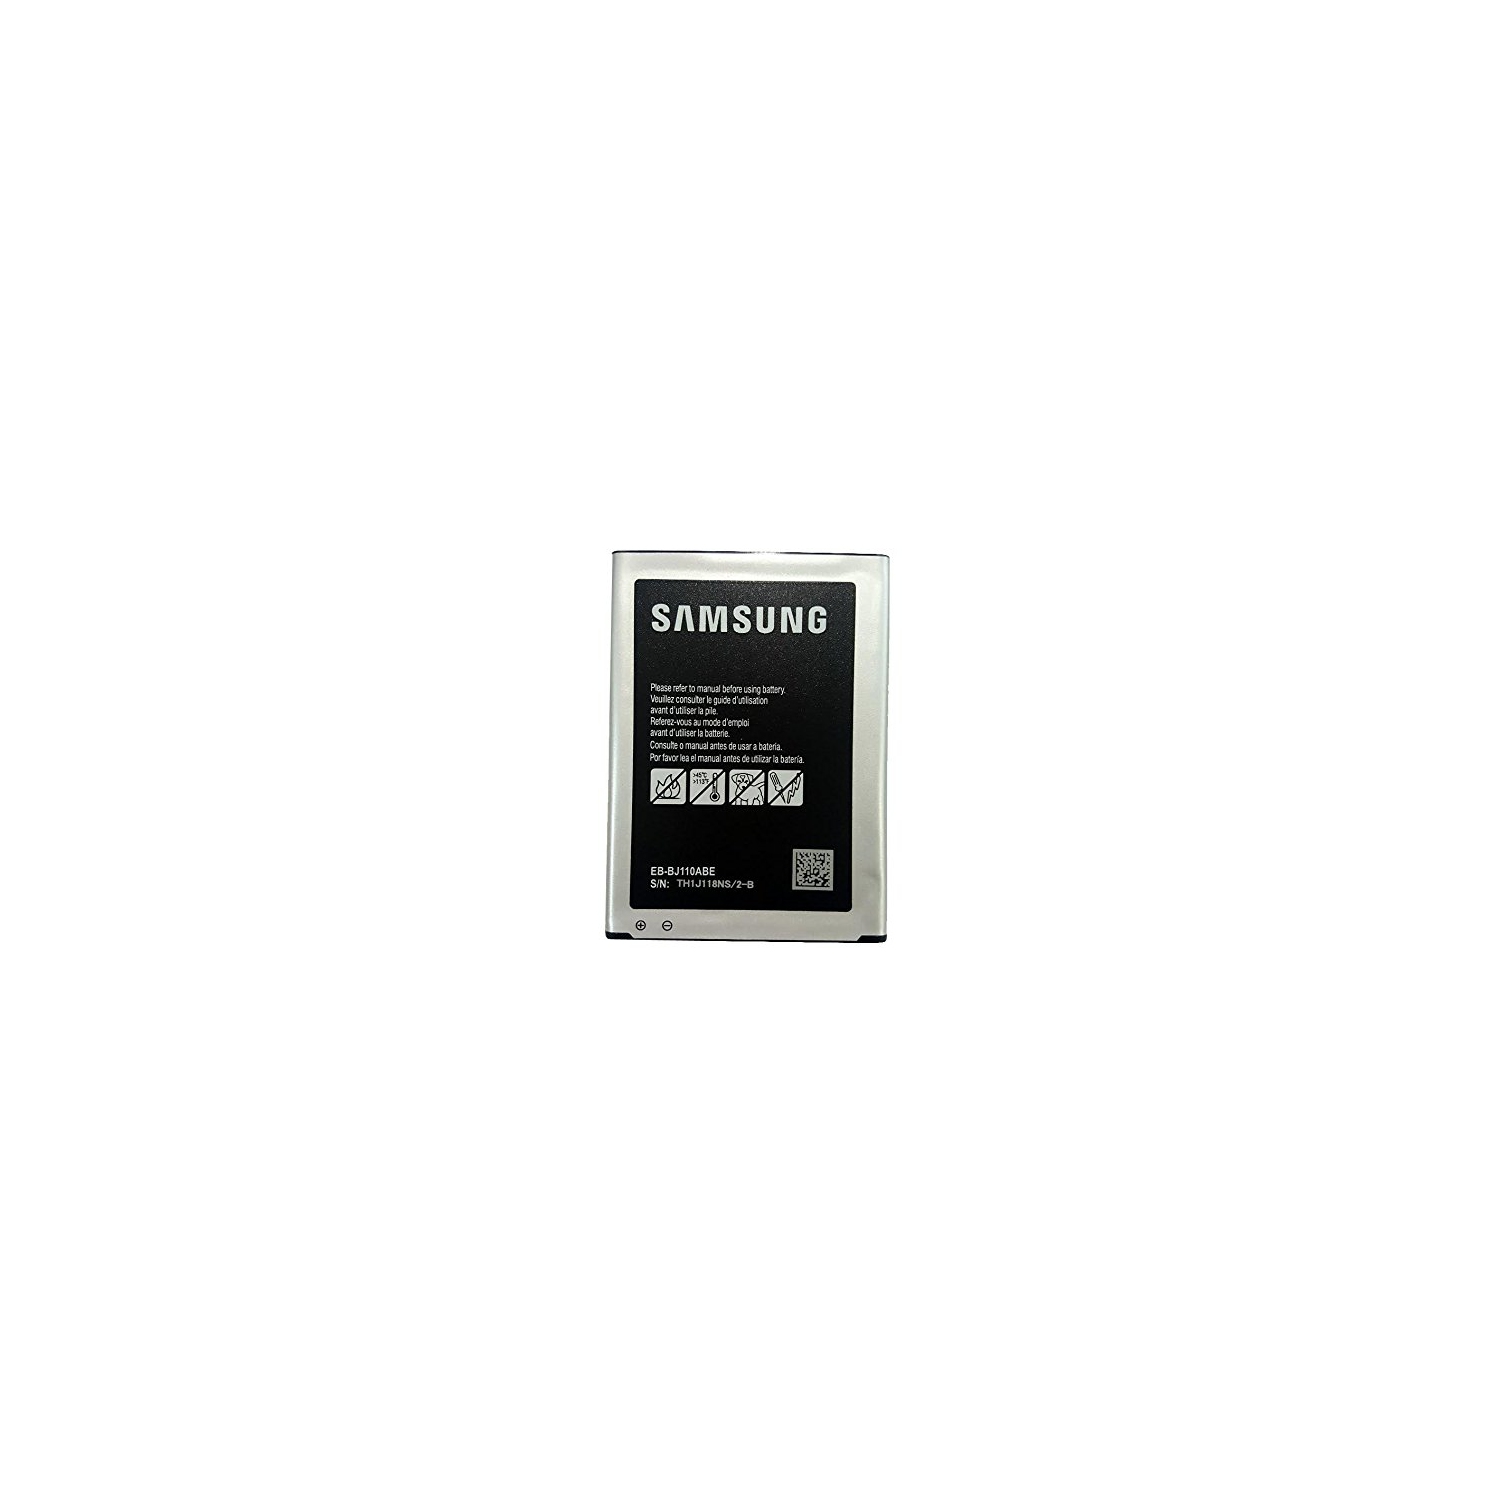 CABLESHARK 1900mAh 3.8v Samsung Compatible Battery EB-BJ110ABE EBBJ110ABE for Samsung Galaxy J1 Ace SM-J110G in Non-Retail Packaging (FREE SHIPPING)